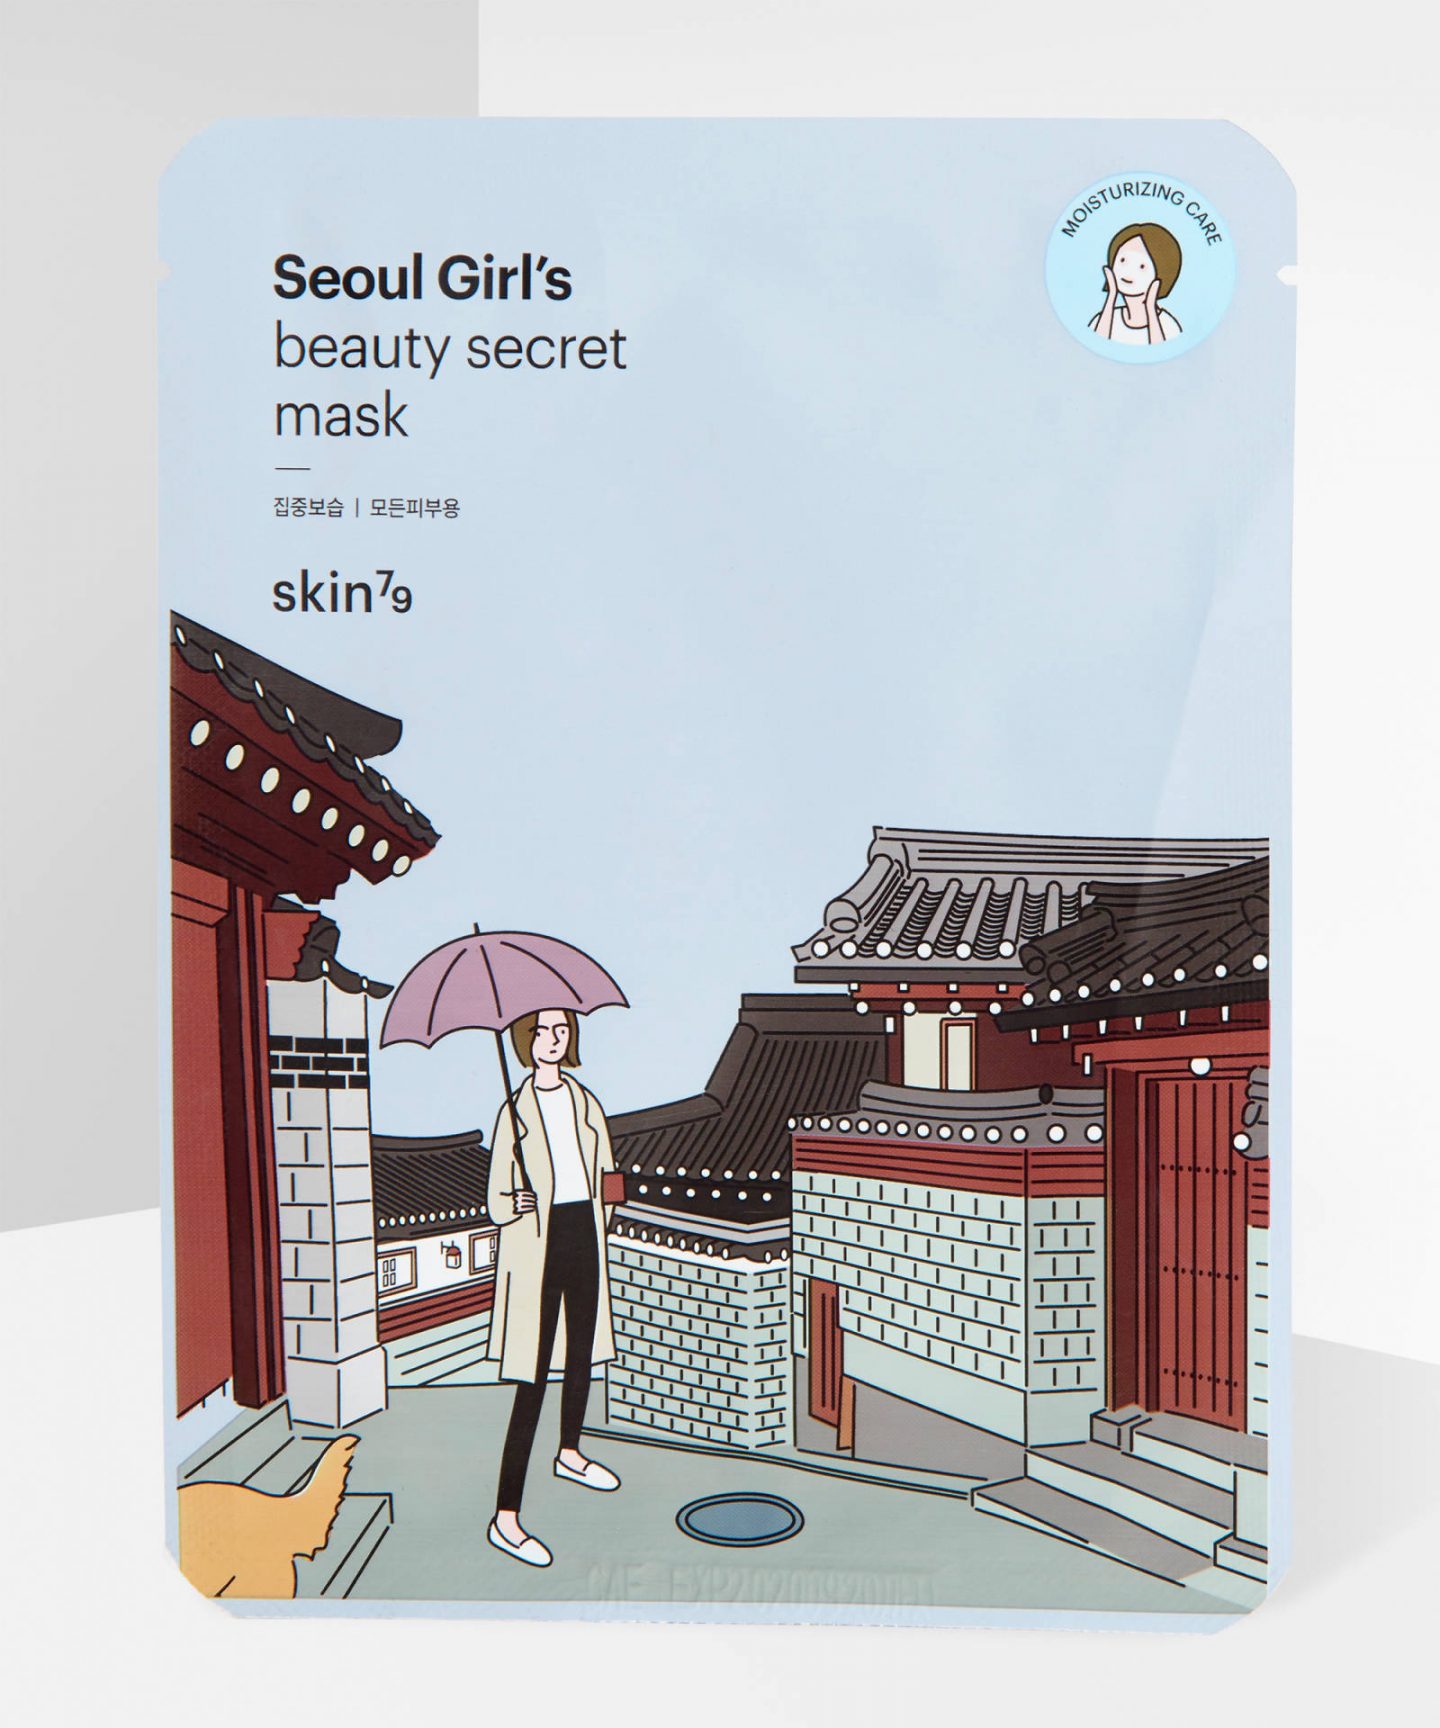 Best sheet masks For Flights - Top 15 moisturising sheet masks perfect for flights to arrive looking rested and refreshed. Includes the best Korean sheet mask, sheet mask for sensitive skin, sheet mask for glowing skin and more. #Garnier #SKII #lemer #esteelauder #itsallbee #clarins #origins #lancome #missha #skincare #beauty #essentials 